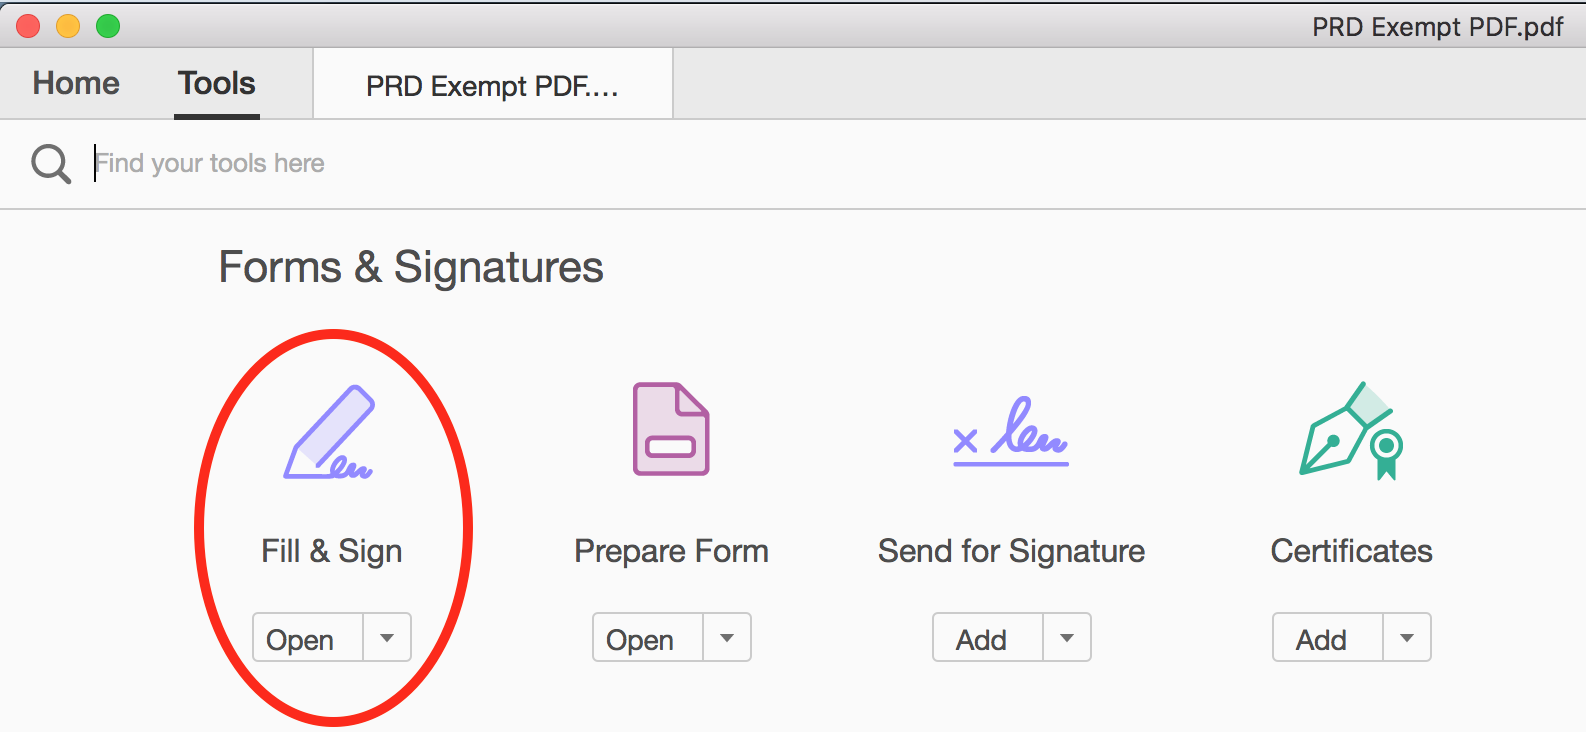 Fill & Sign is the first option under Forms & Signatures.